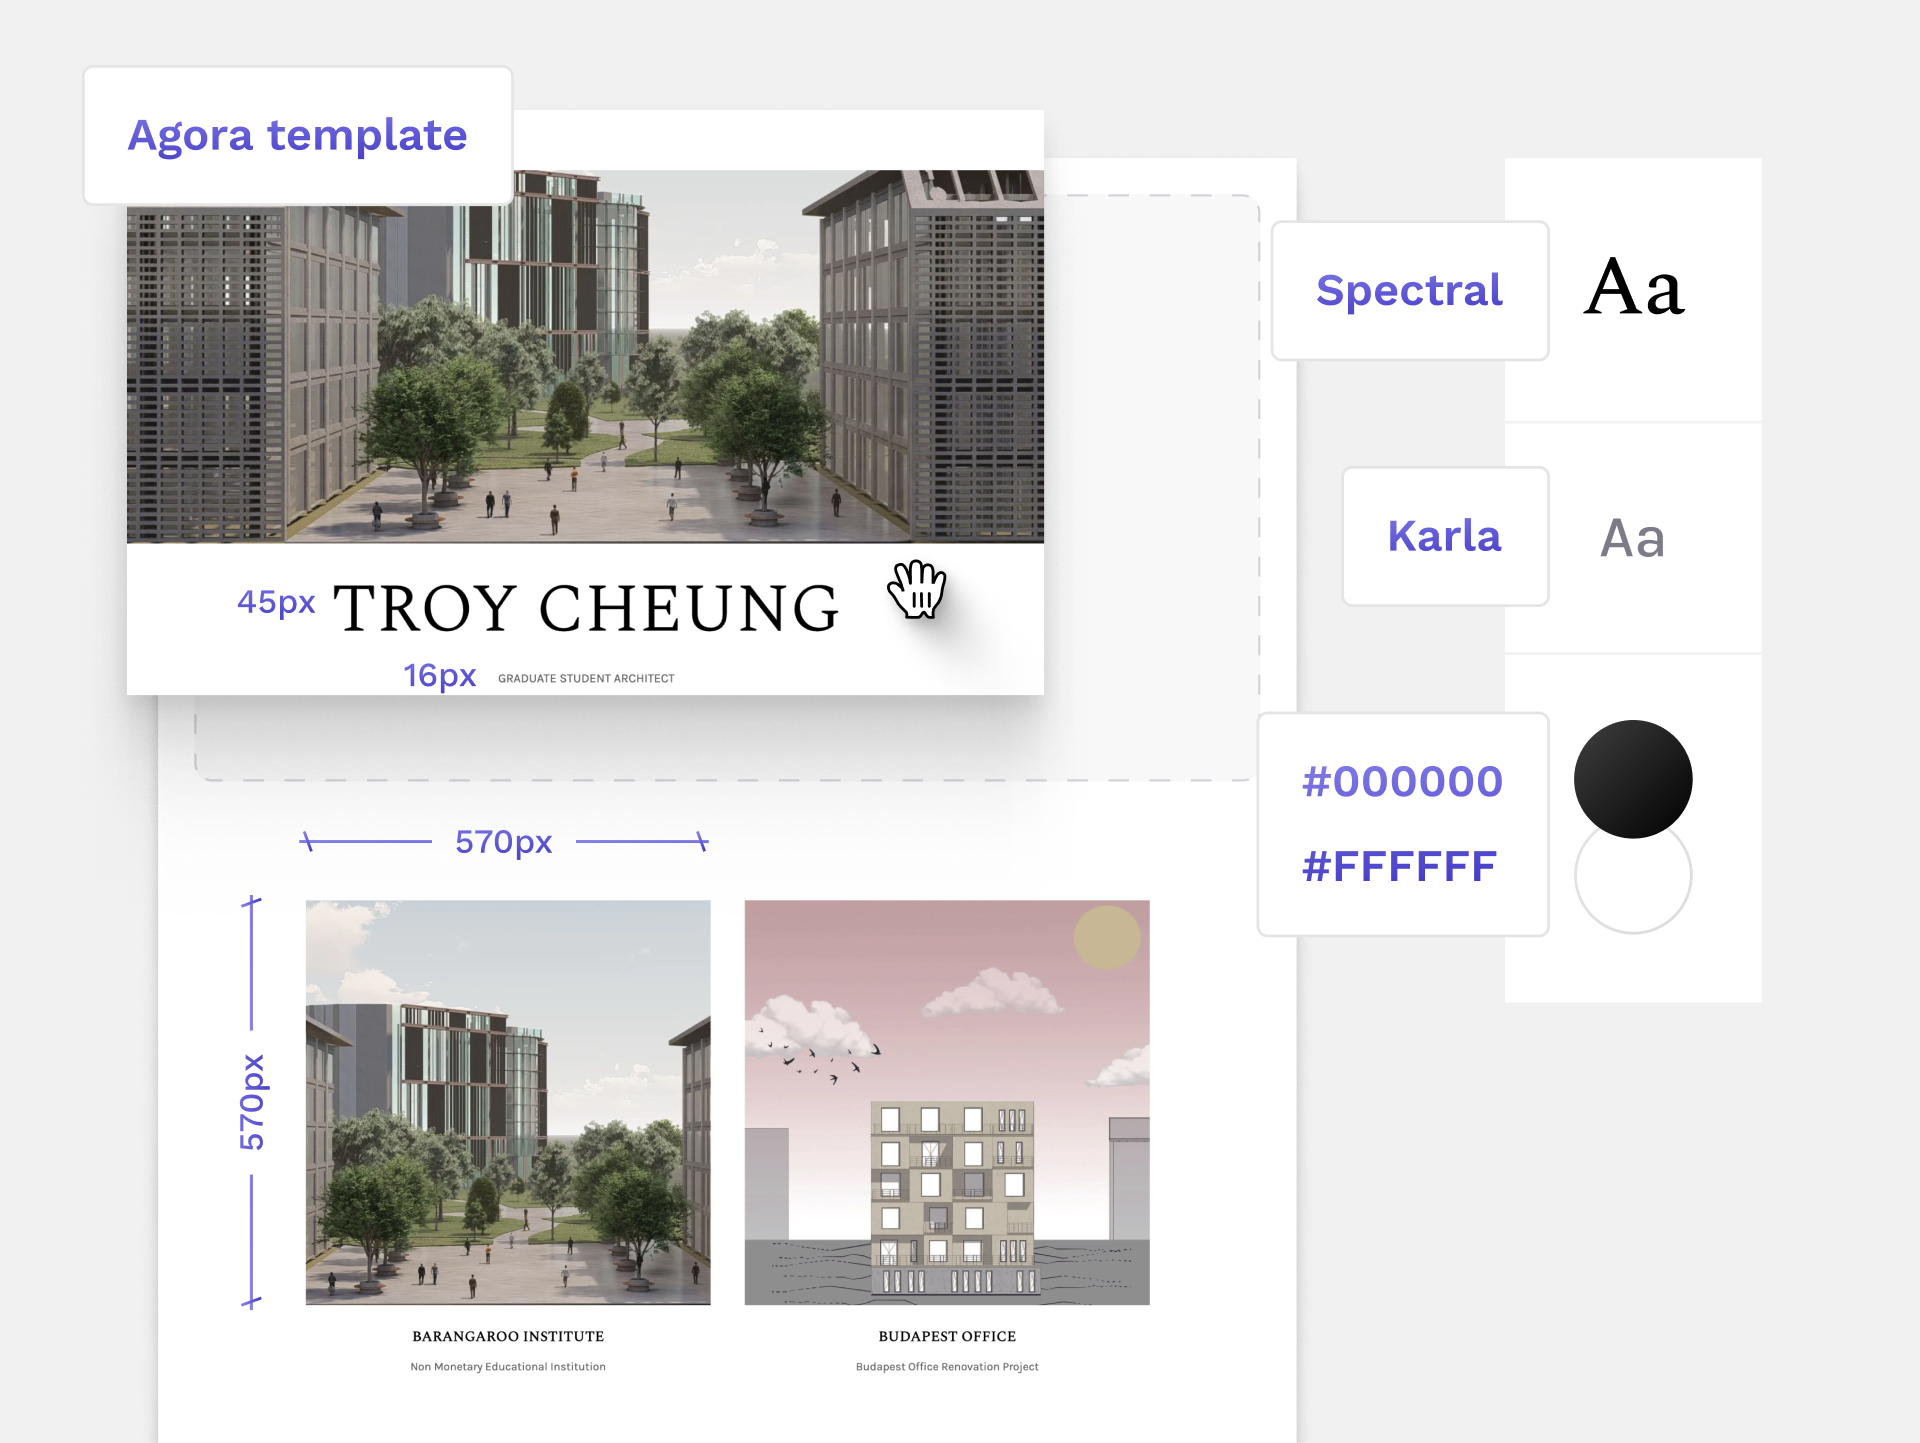 Recreate Troy Cheung's architecture website design. Colors, font types and sizes are included in this picture.